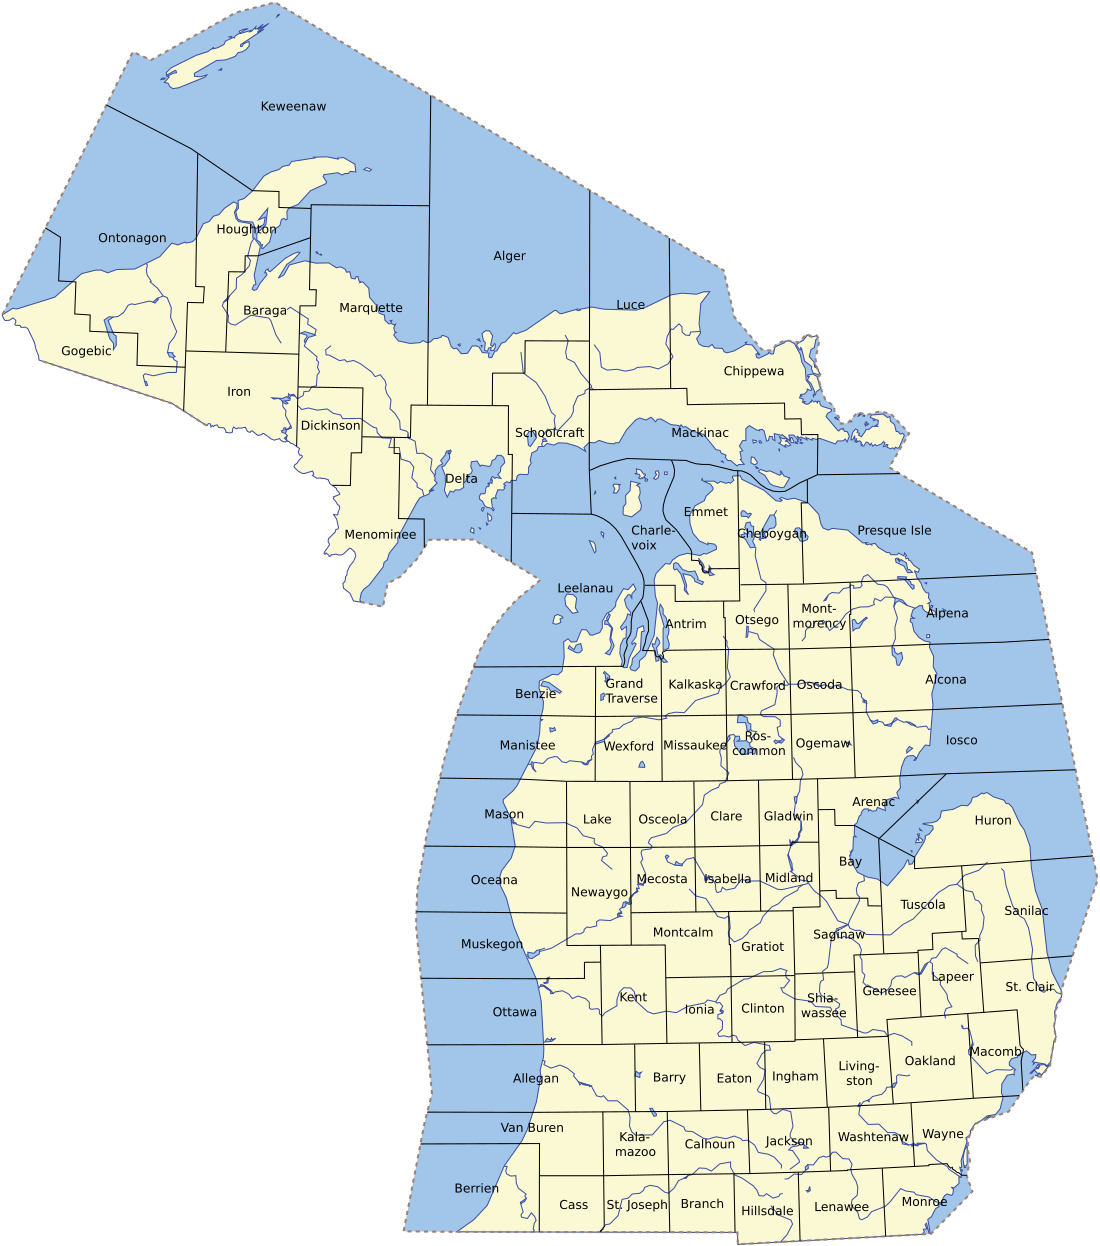 21 counties in Northern Michigan.